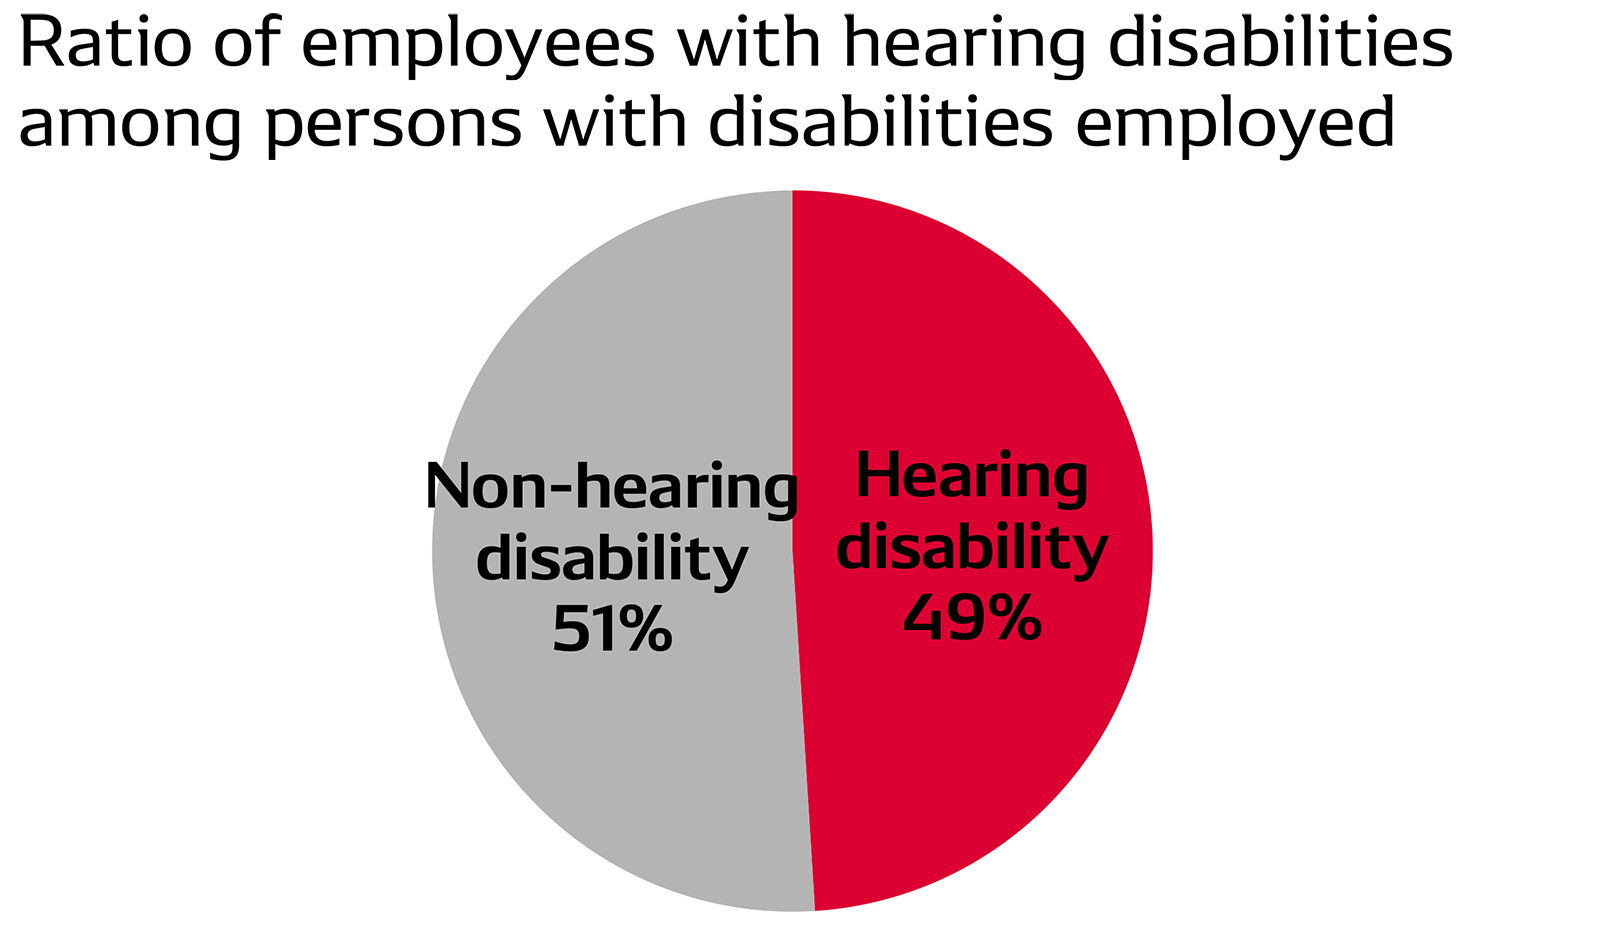 Ratio of employees with hearing disabilities among persons with disabilities employed